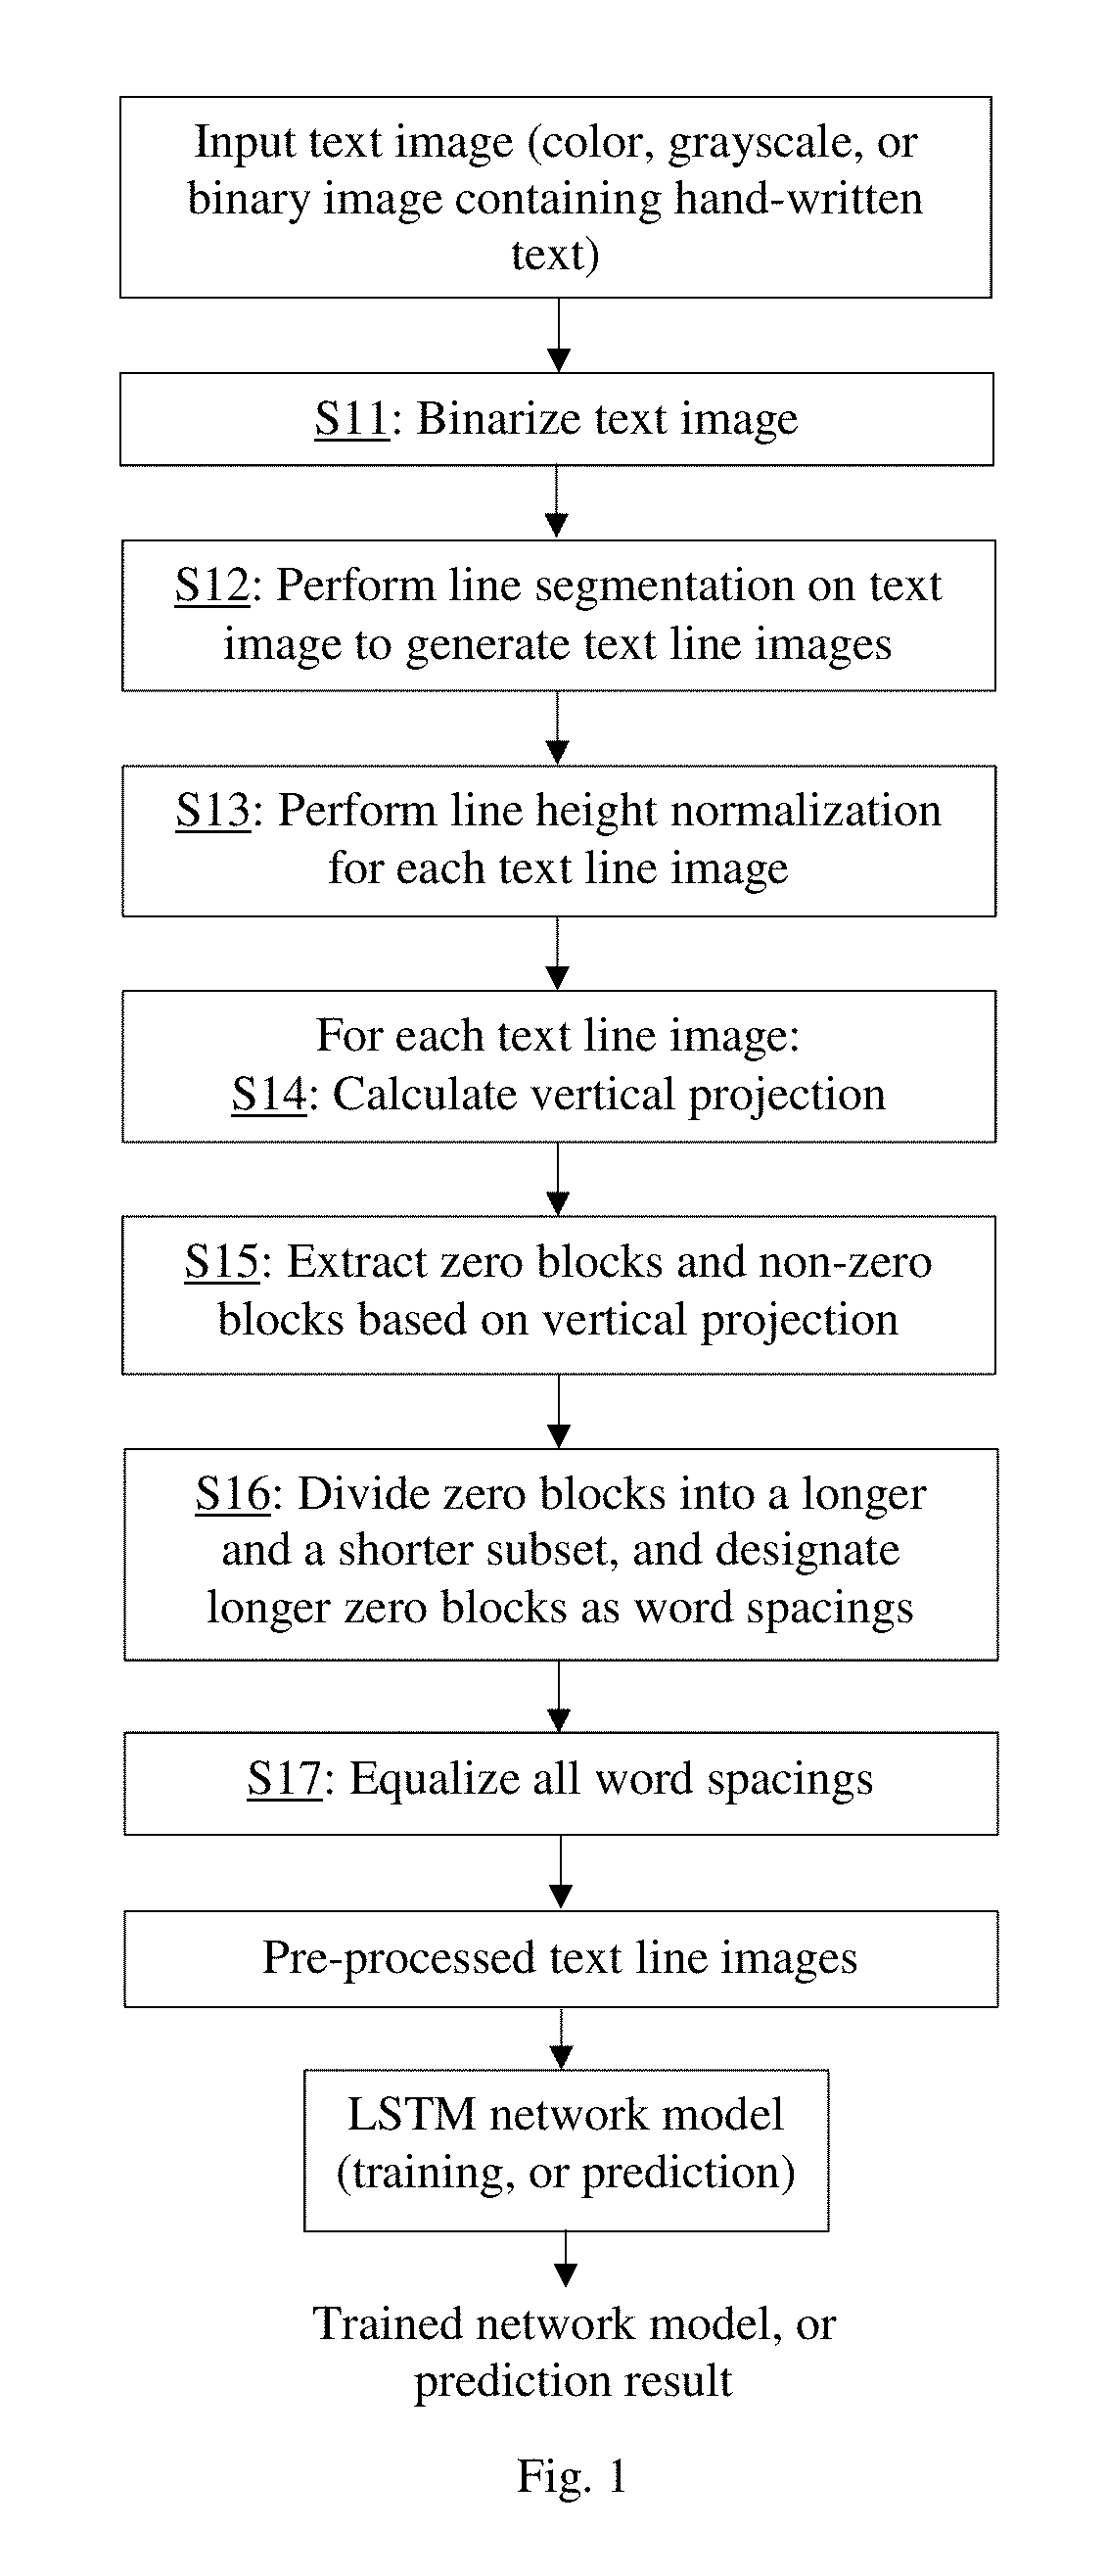 Text image processing using word spacing equalization for ICR system employing artificial neural network